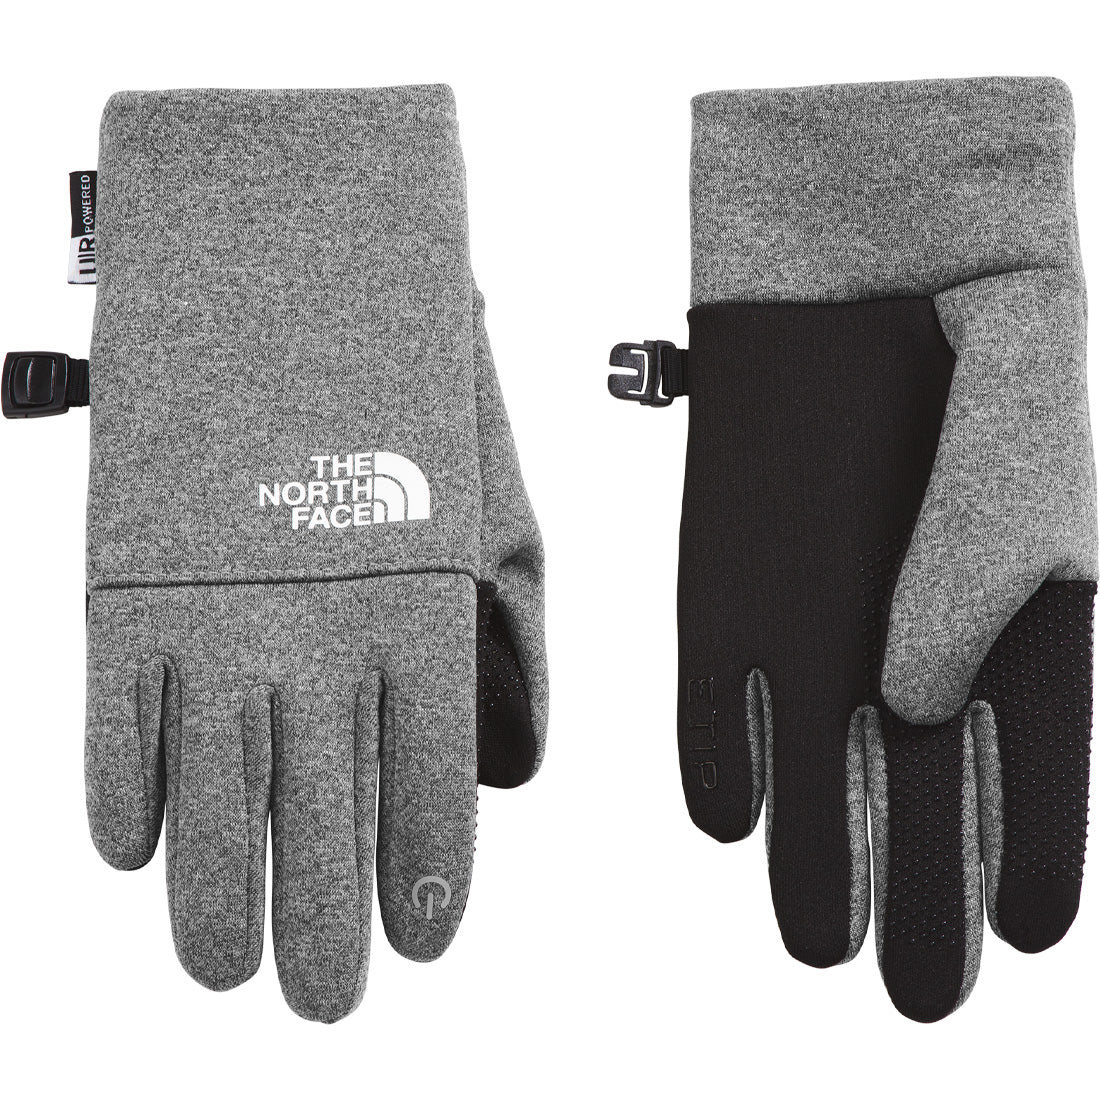 The North Face Etip Reycled Glove - Kids